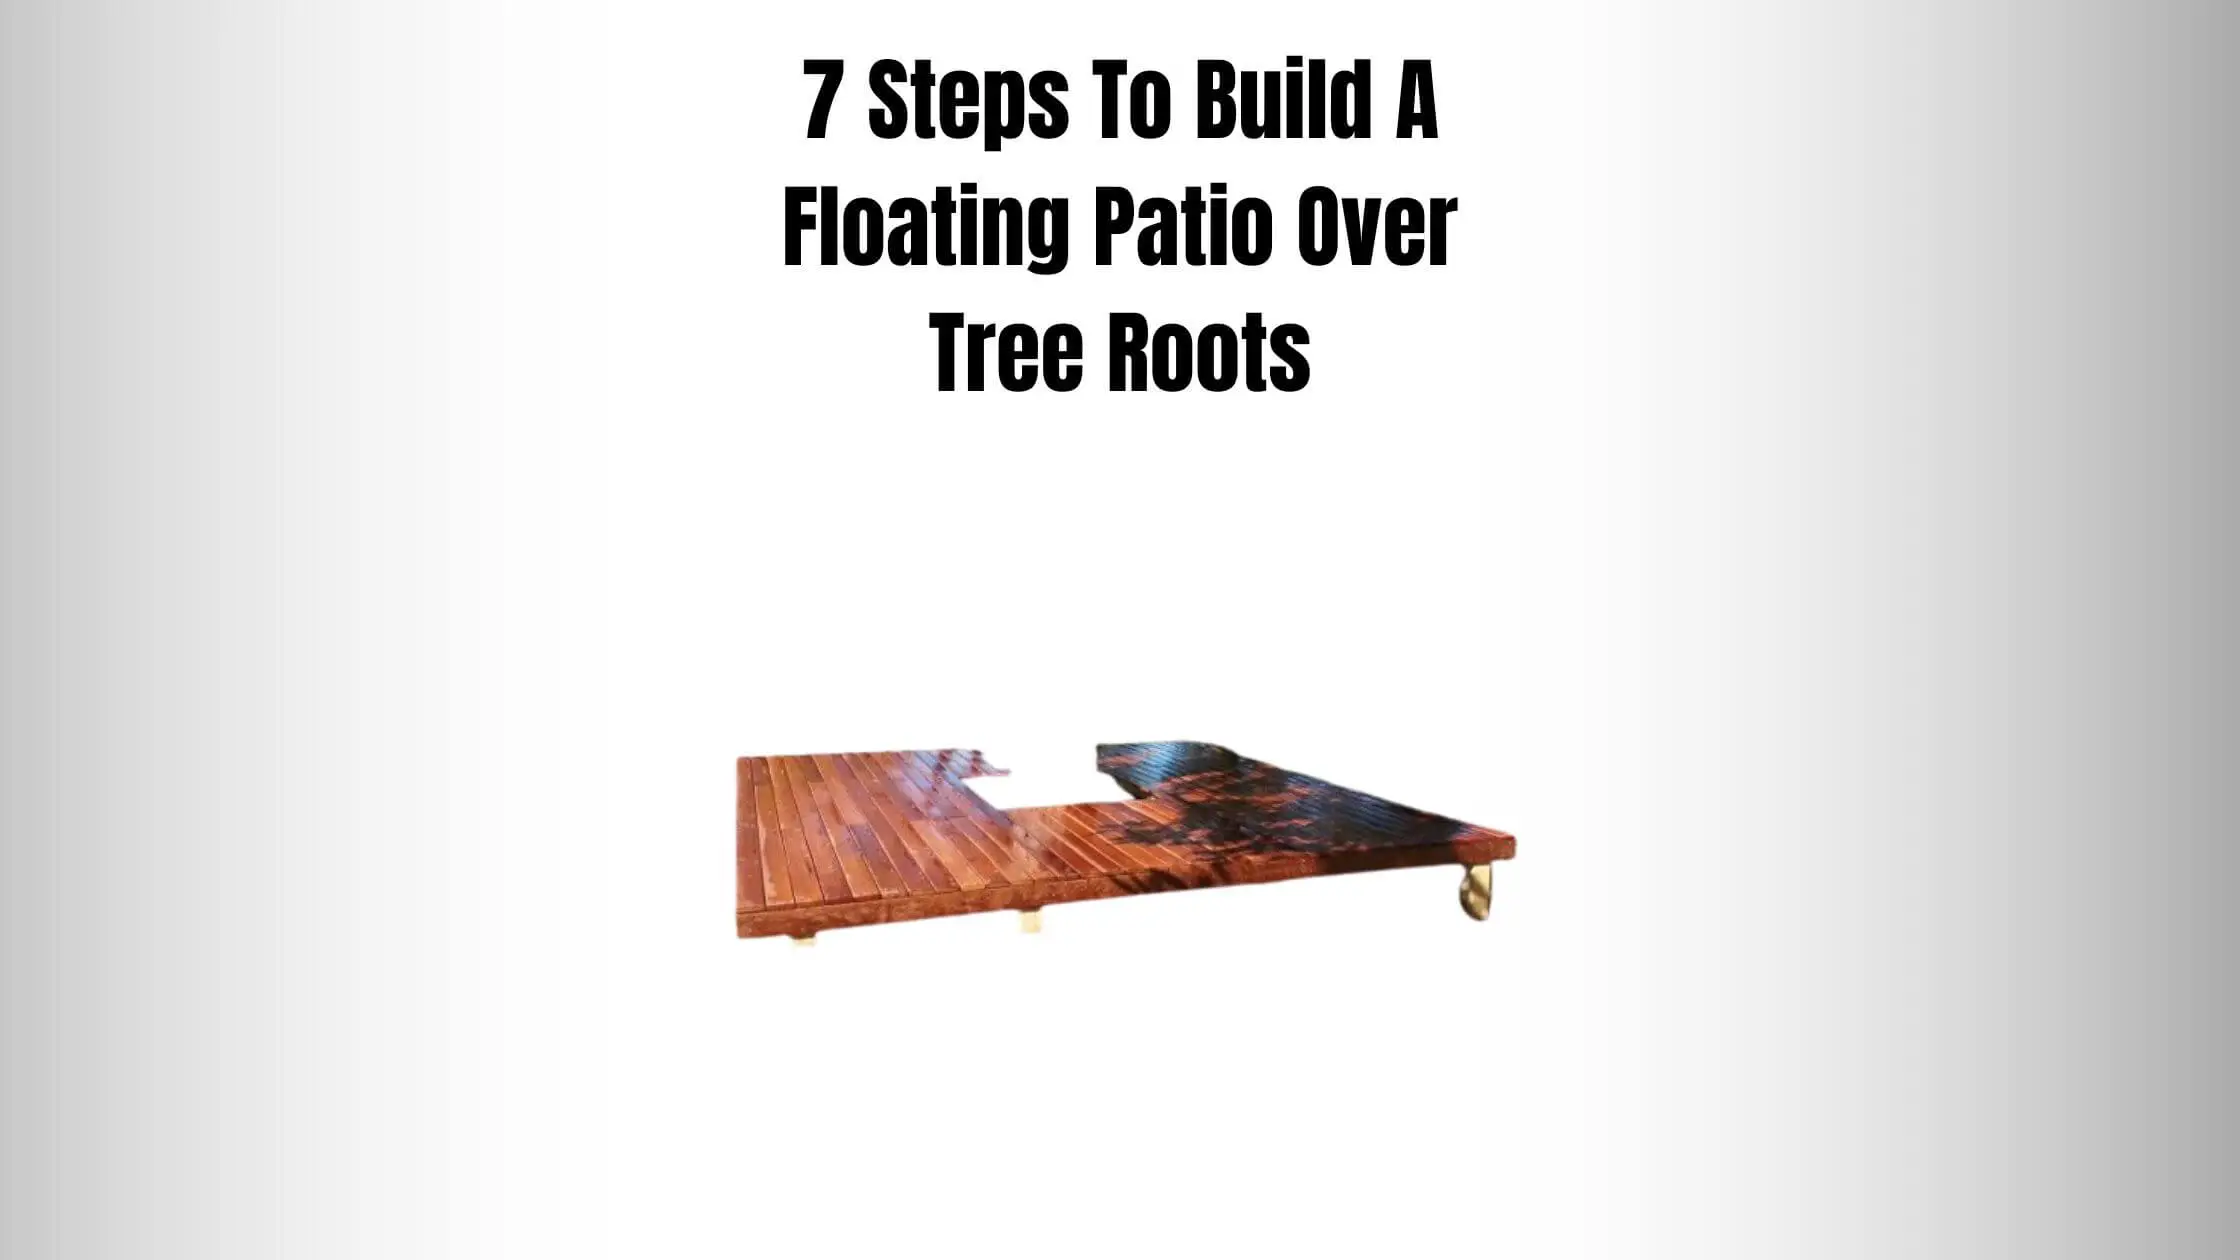 7 Steps To Build A Floating Patio Over Tree Roots